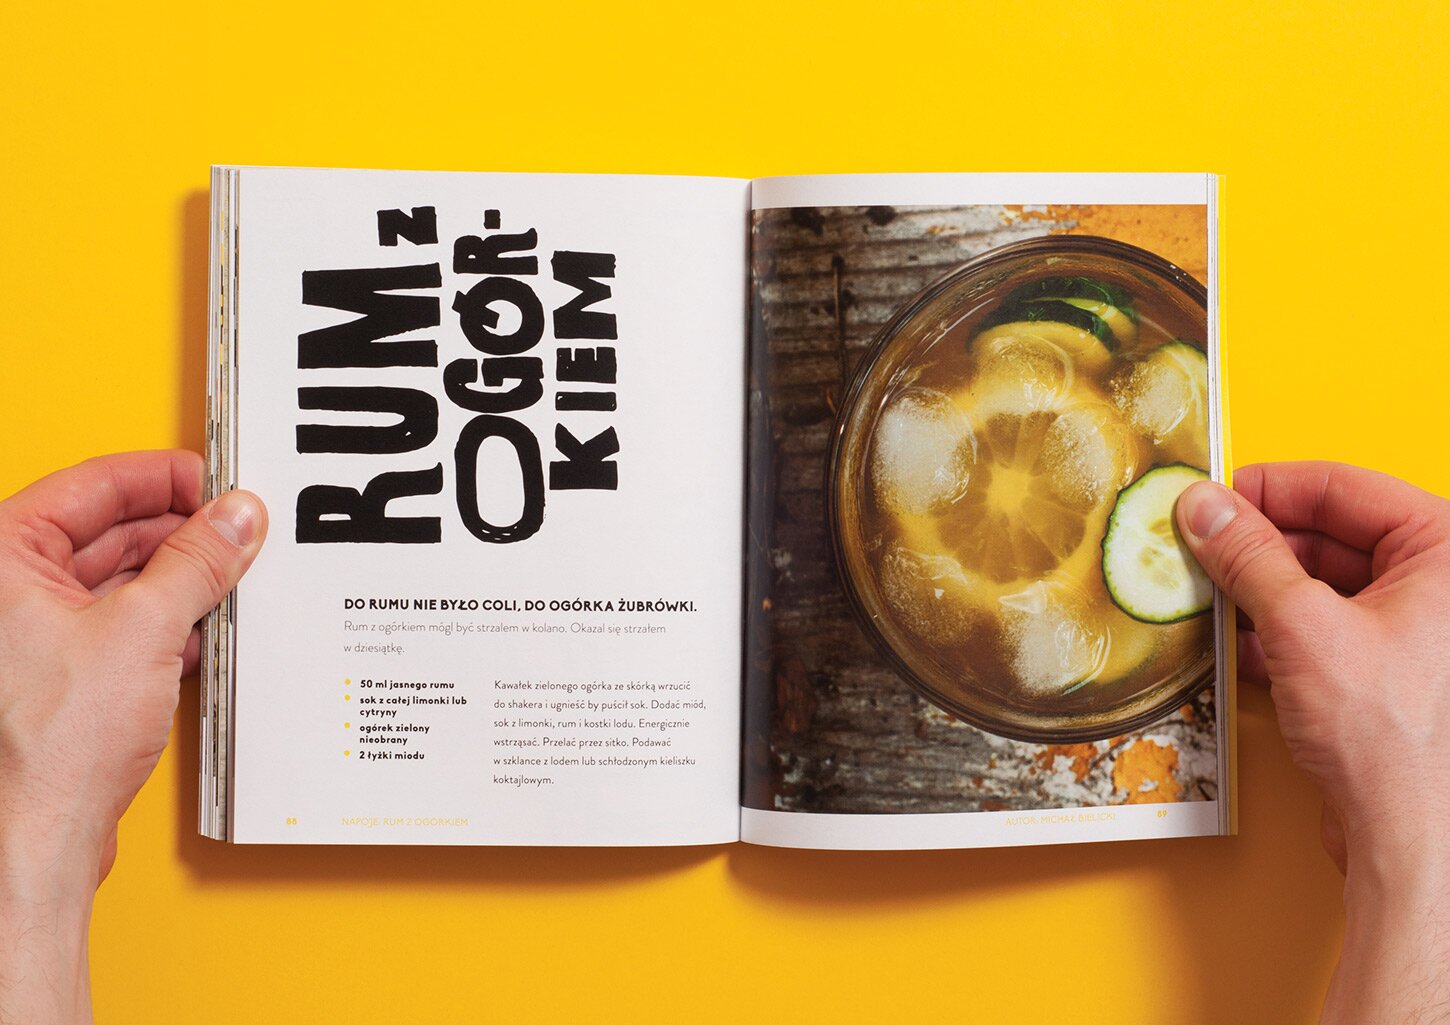 A spread from the UCZTA cookbook with a picture of glass with rum based drink